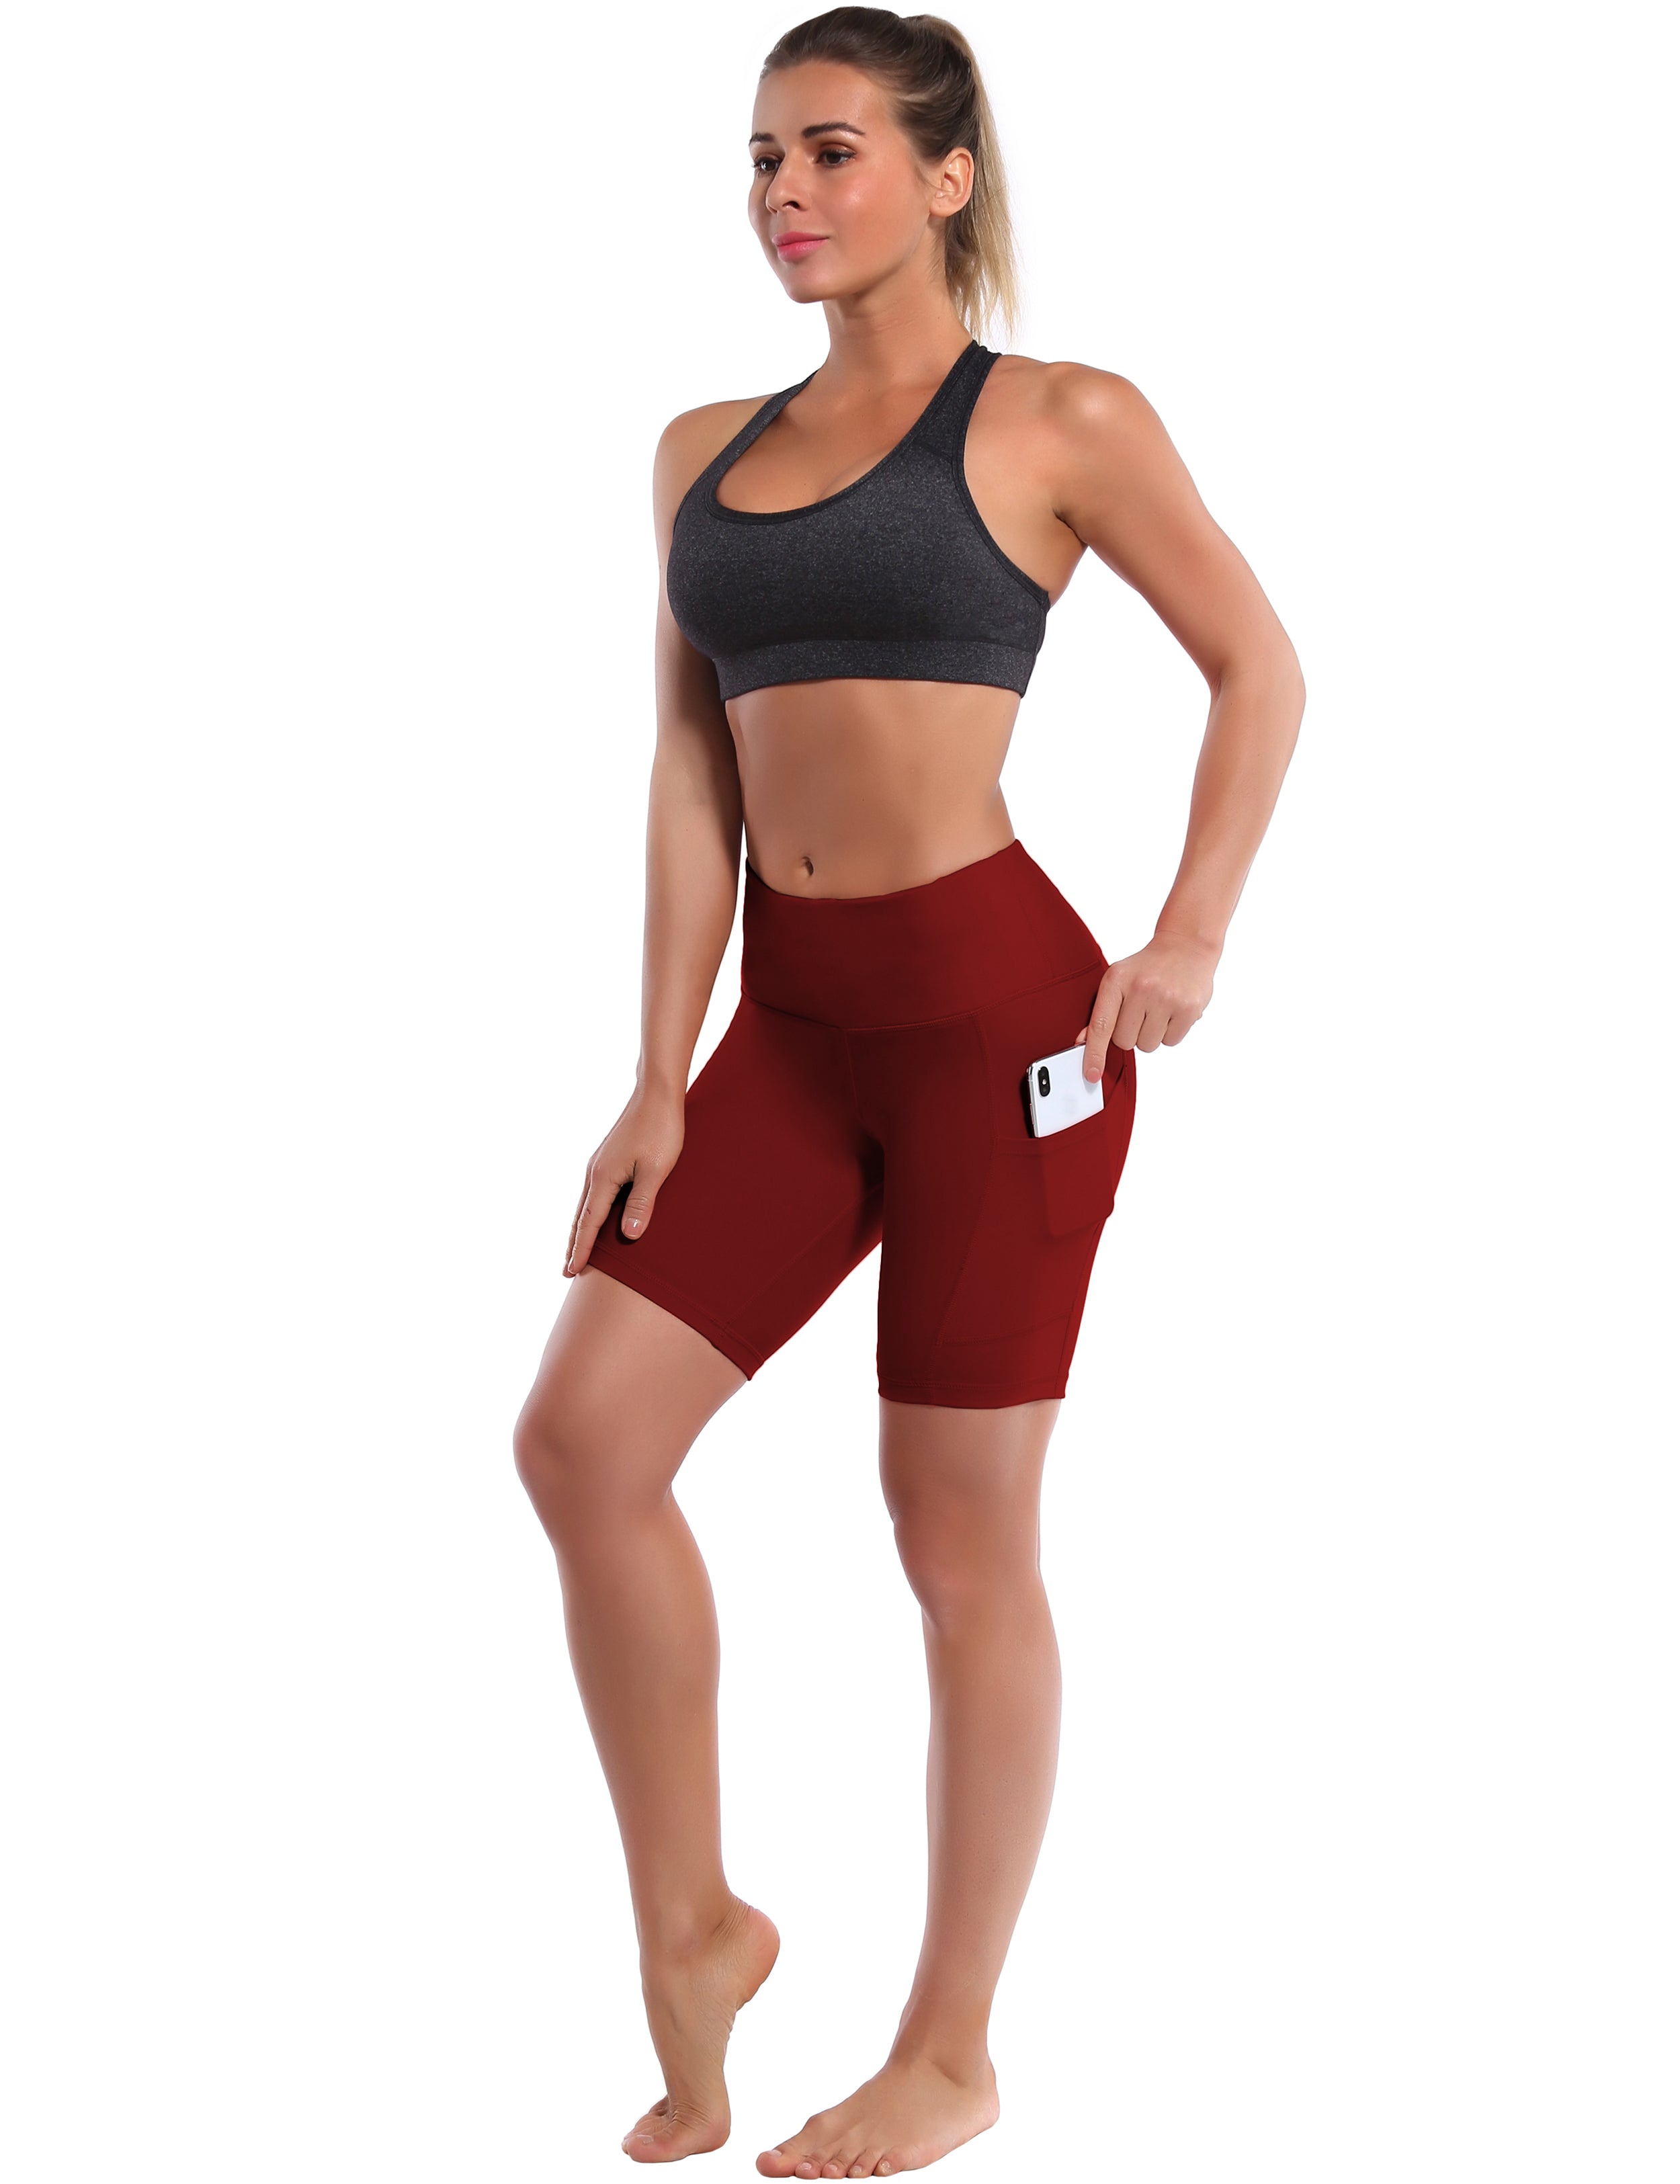 8" Side Pockets yogastudio Shorts cherryred Sleek, soft, smooth and totally comfortable: our newest style is here. Softest-ever fabric High elasticity High density 4-way stretch Fabric doesn't attract lint easily No see-through Moisture-wicking Machine wash 75% Nylon, 25% Spandex